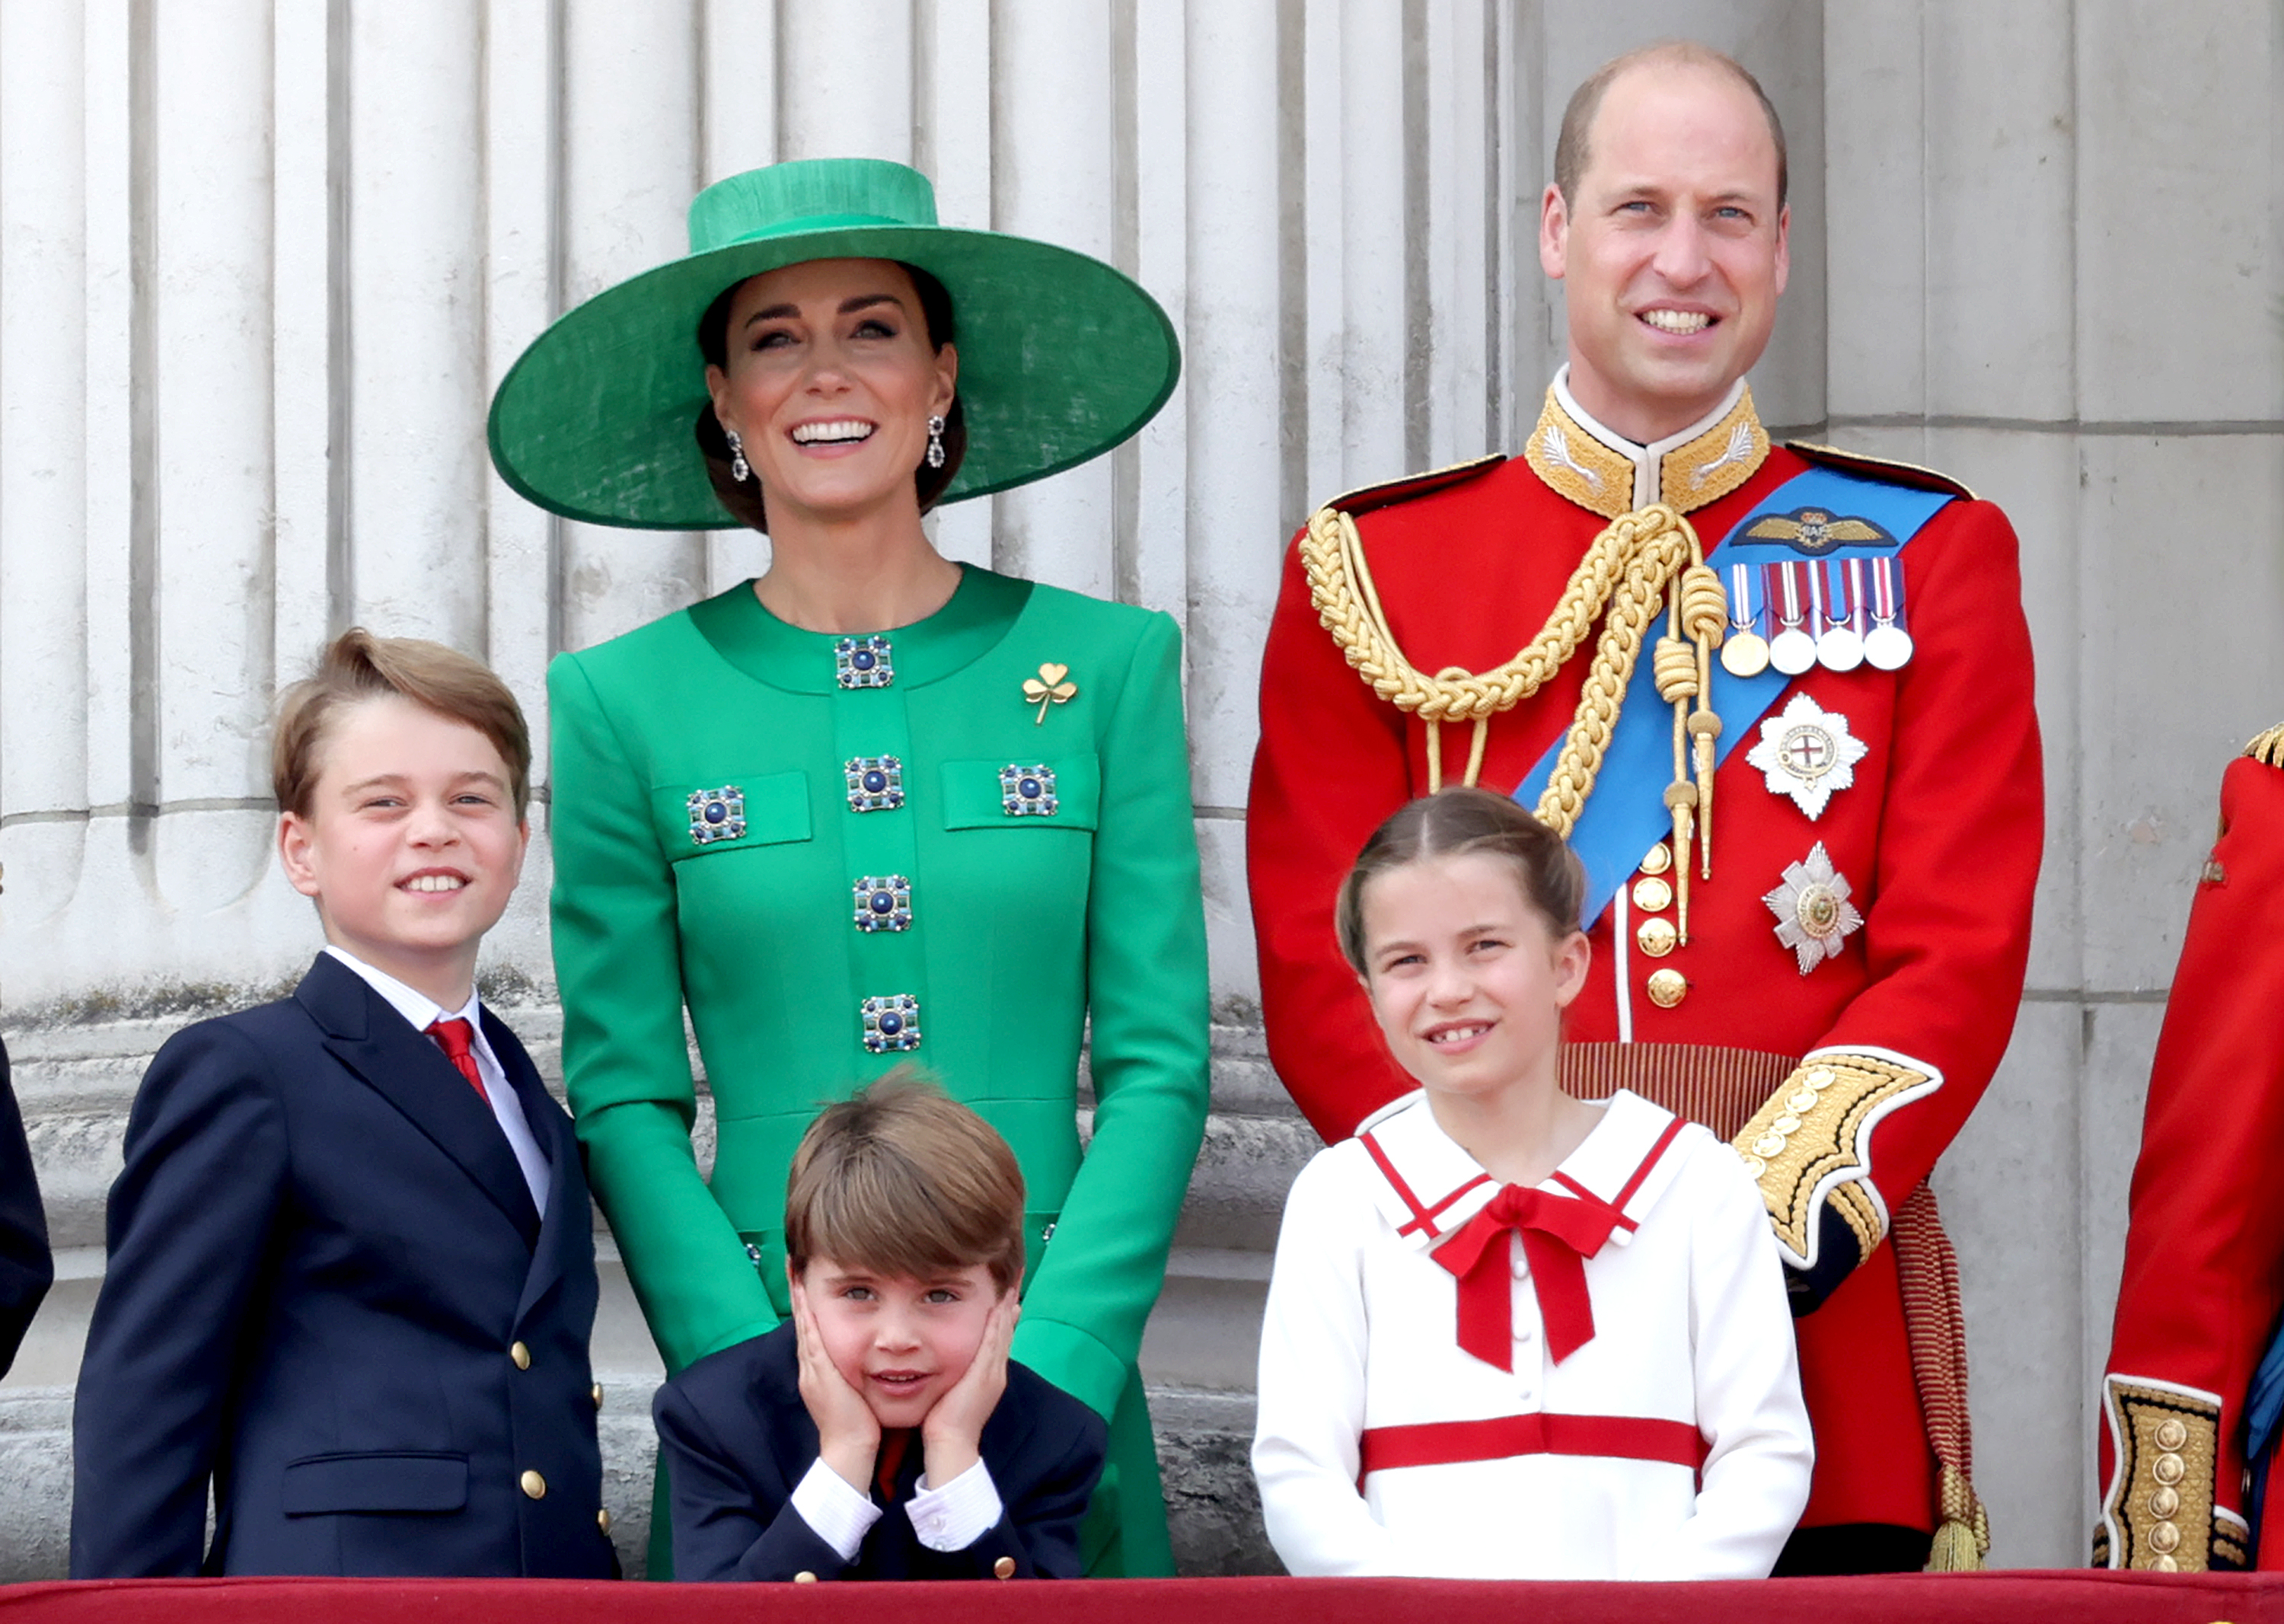 Royal family in formal attire on a balcony, two adults in ceremonial dress, two boys in suits, girl in dress with red accents